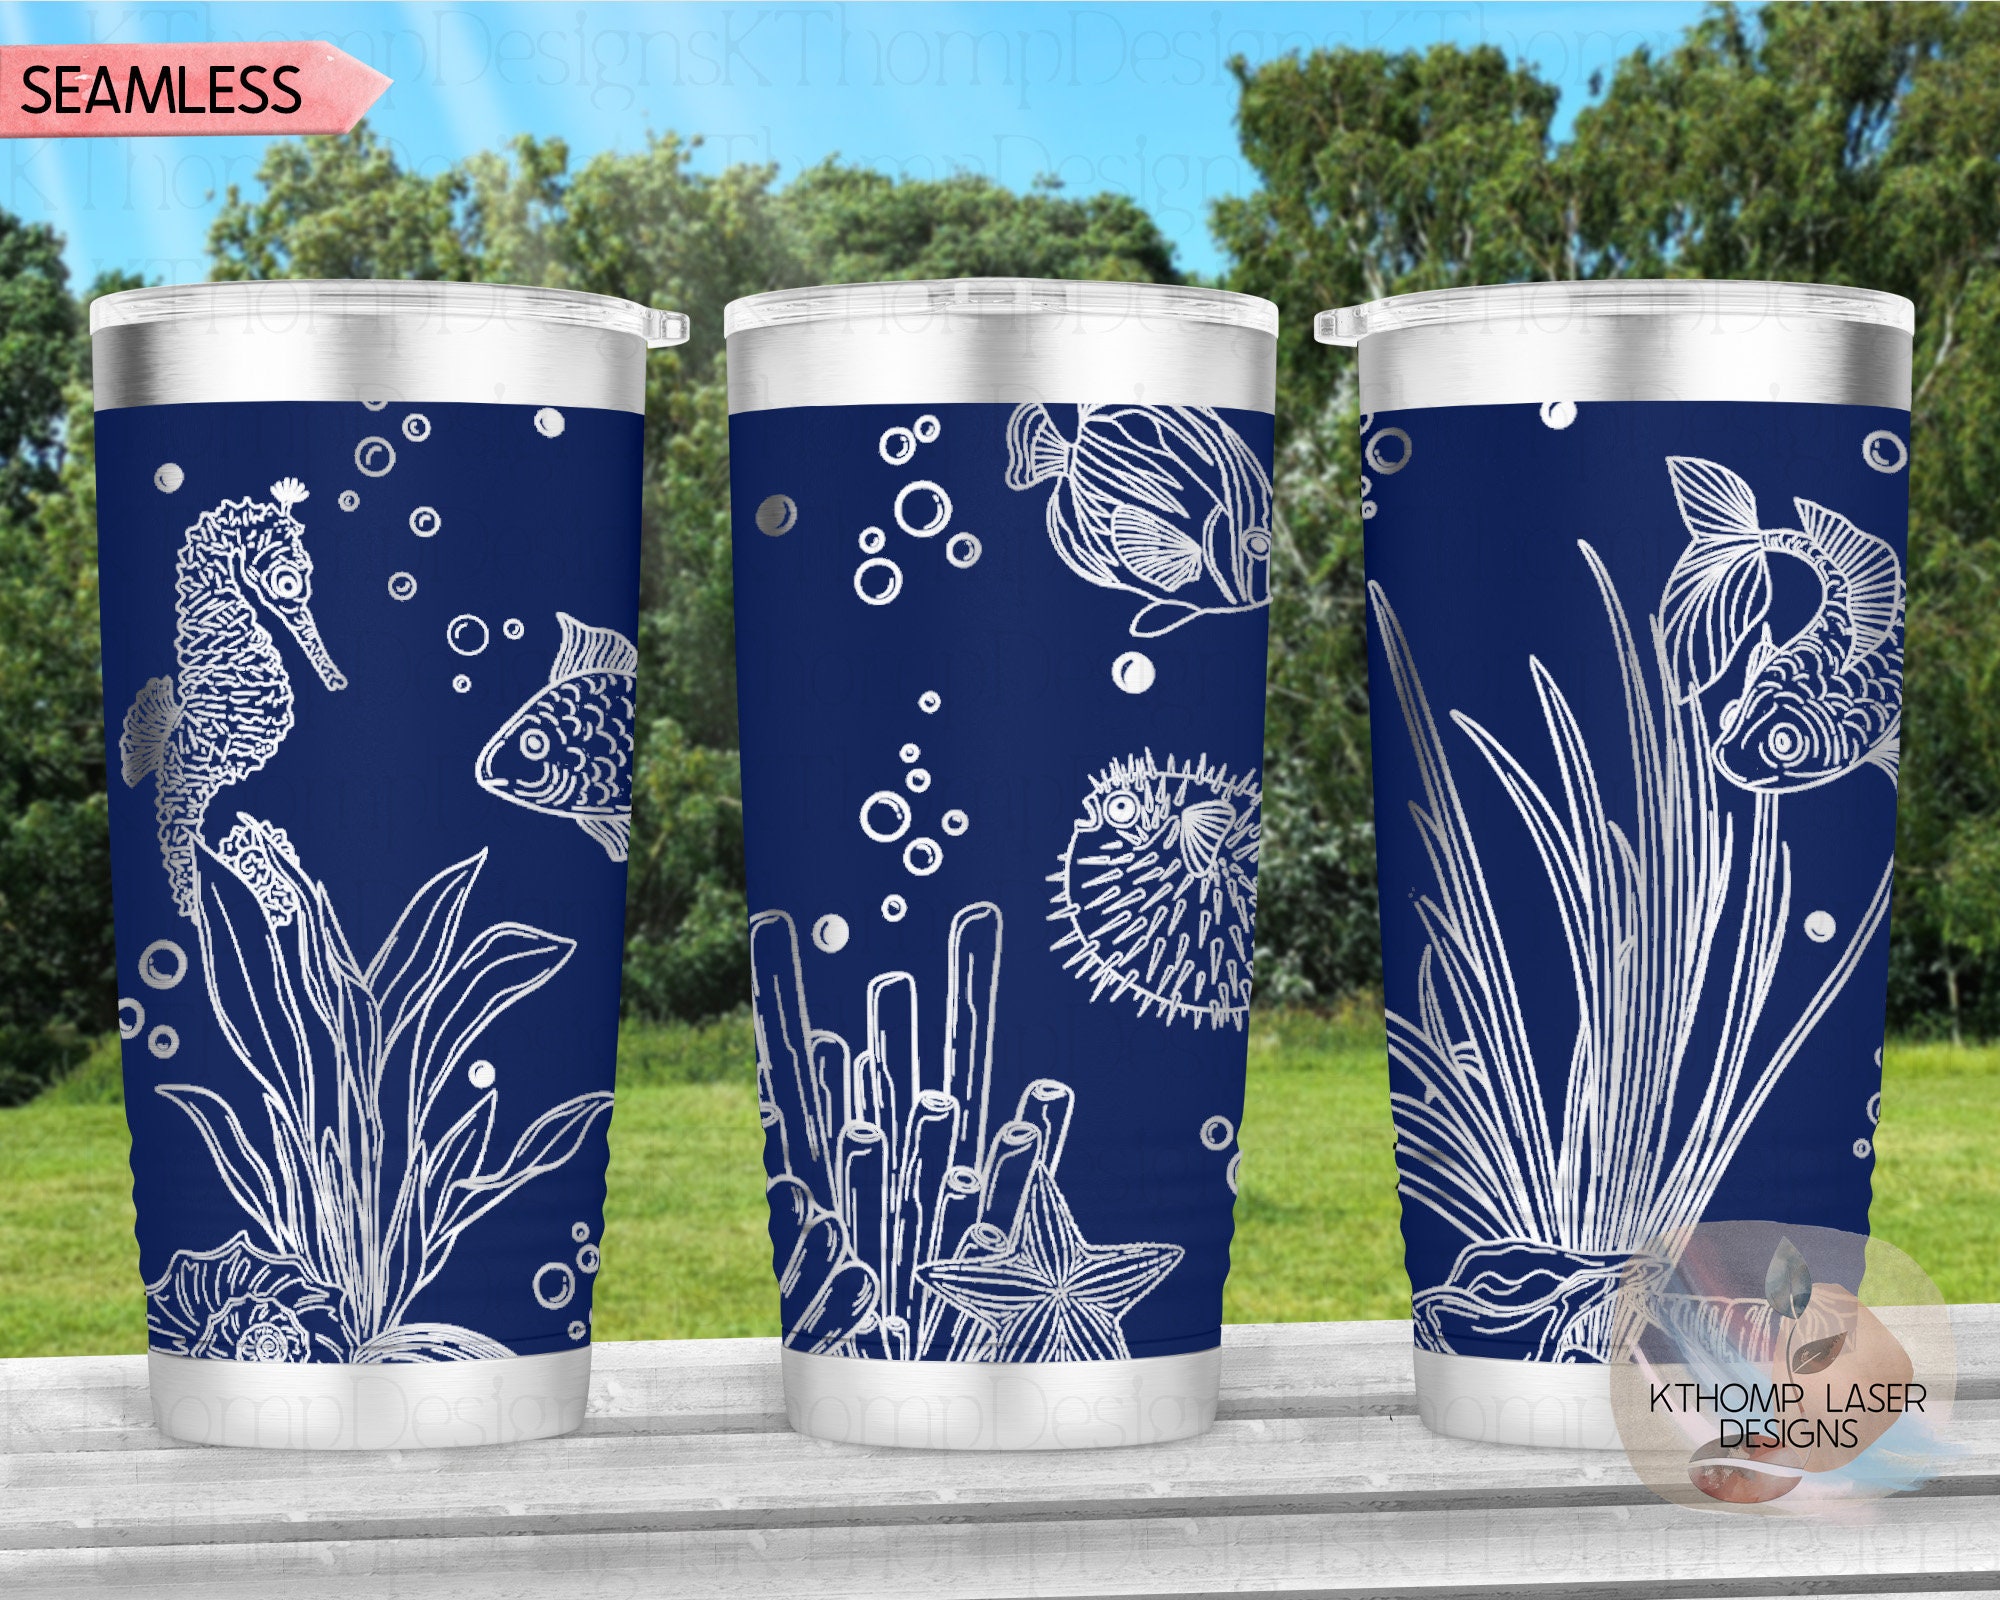 Customized Tumbler Using Rotary Attachment - Create Craft Love